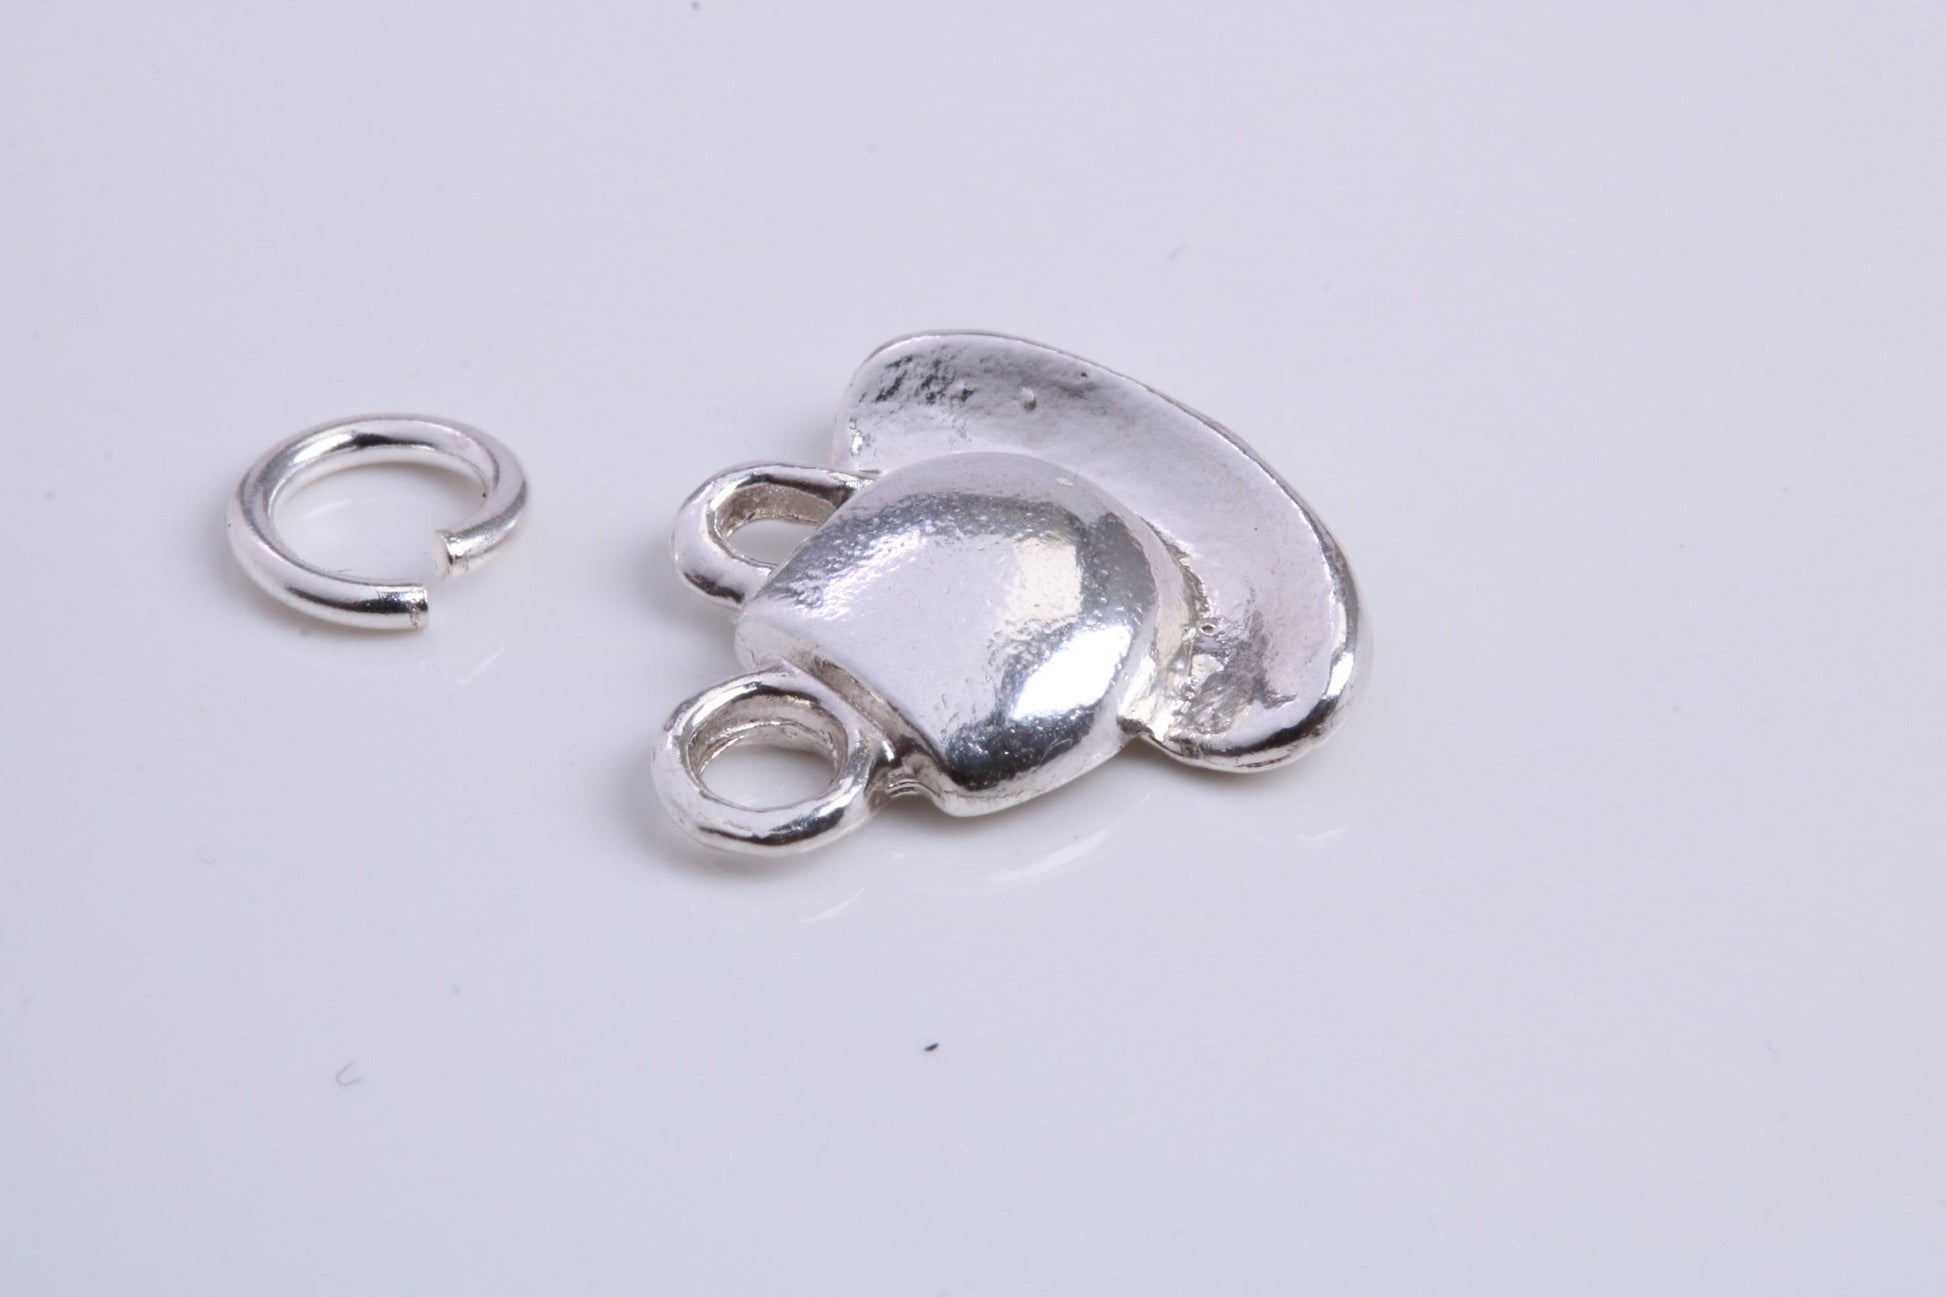 Tea Cup and Saucer Charm, Traditional Charm, Made from Solid 925 Grade Sterling Silver, Complete with Attachment Link